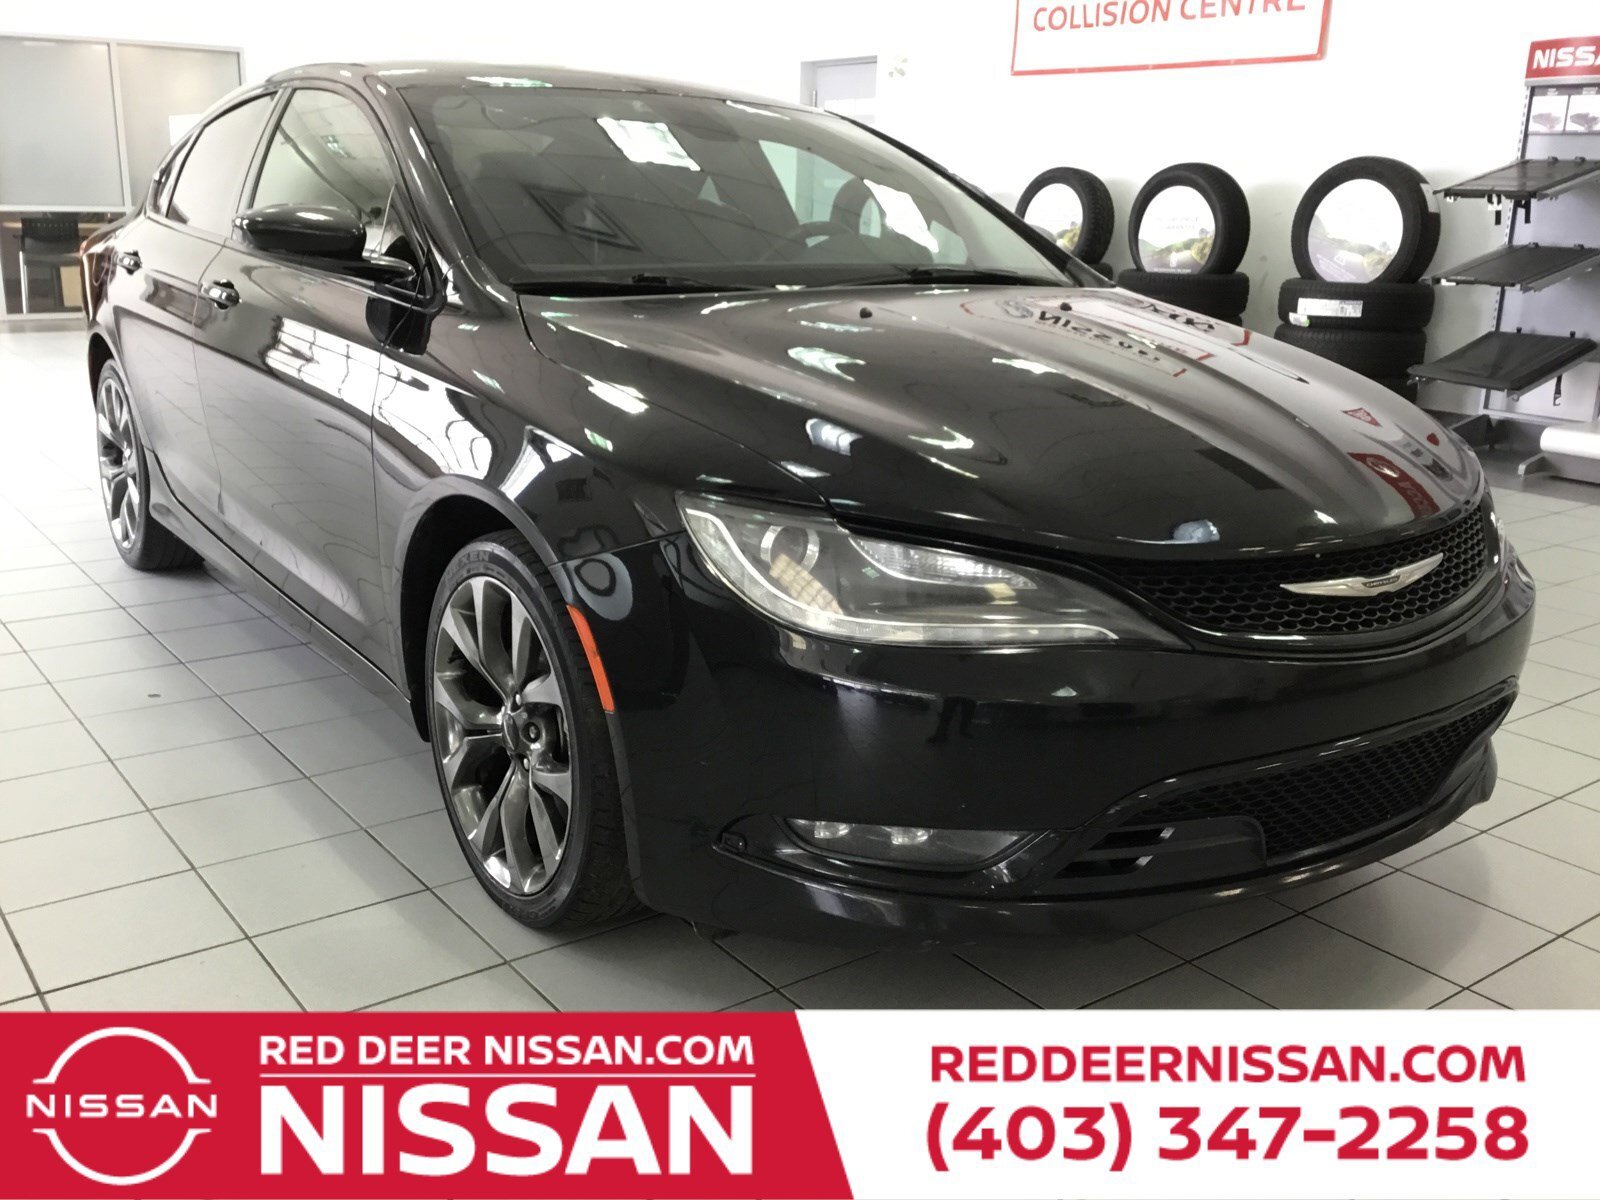 2015 Chrysler 200 S  *RARE AWD* ONE OWNER, LEATHER AND COOLED SEATS,